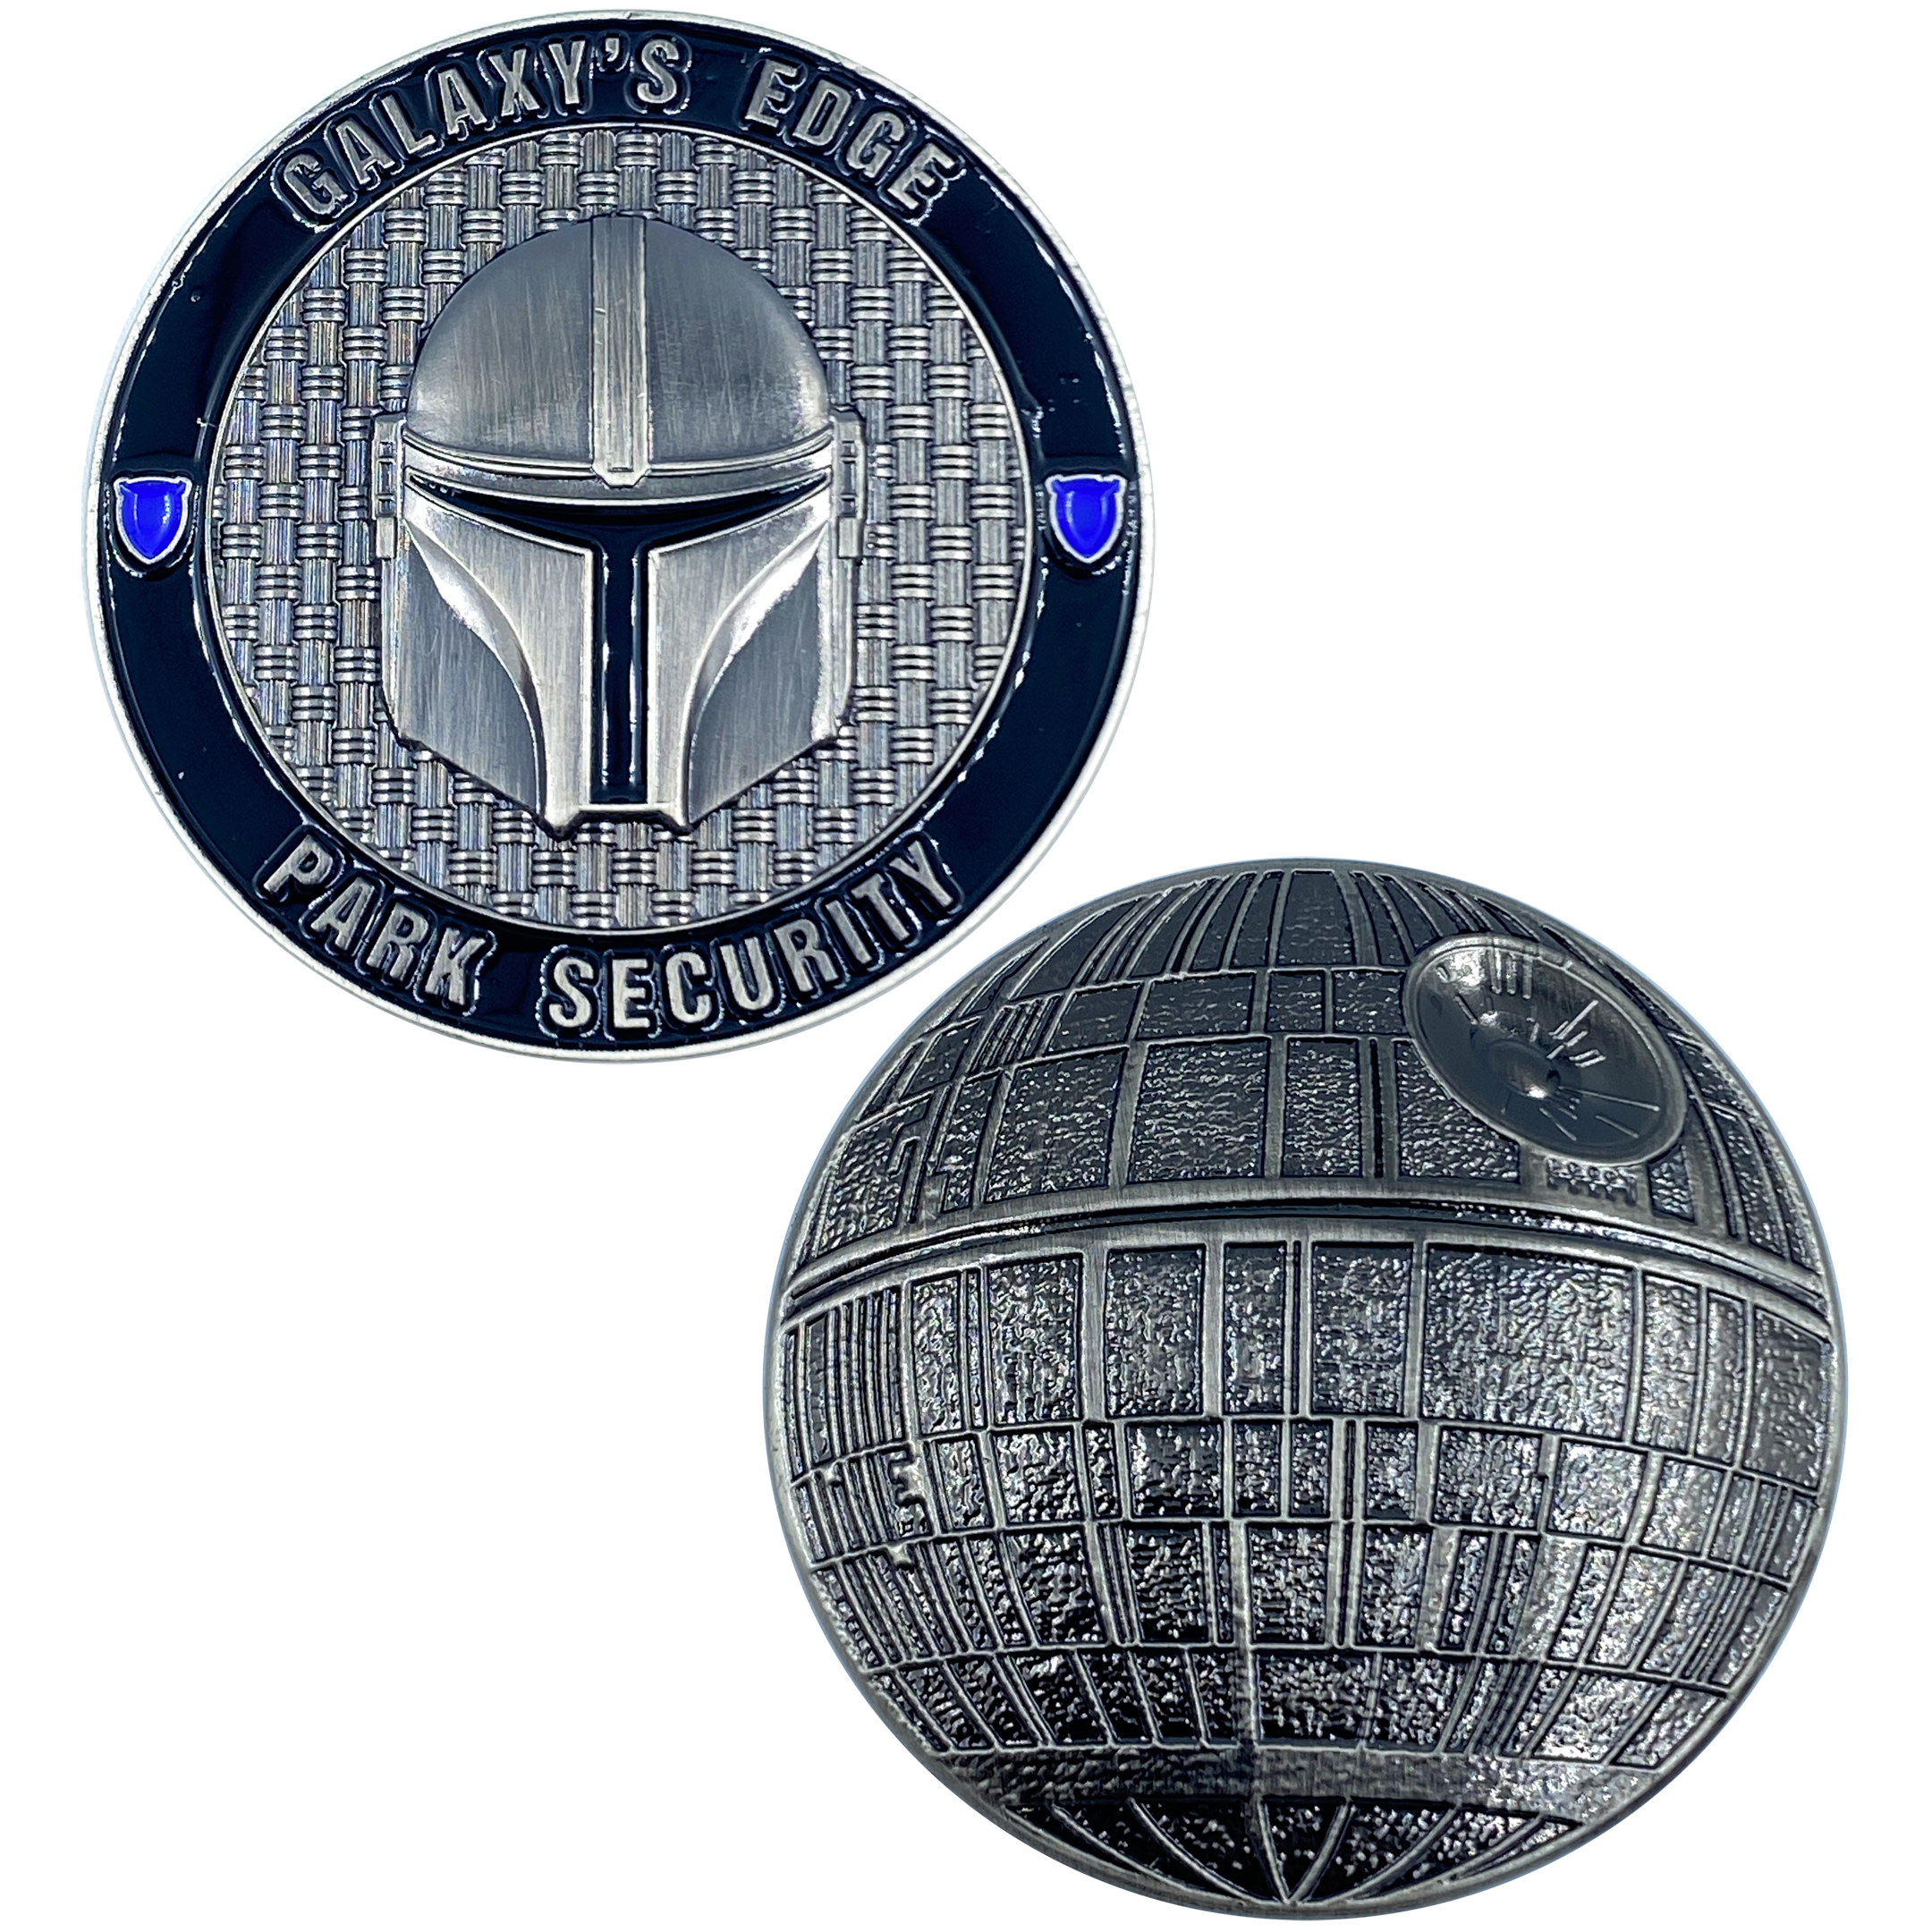 DL10-06 Galaxy's Edge Park Security Challenge Coin